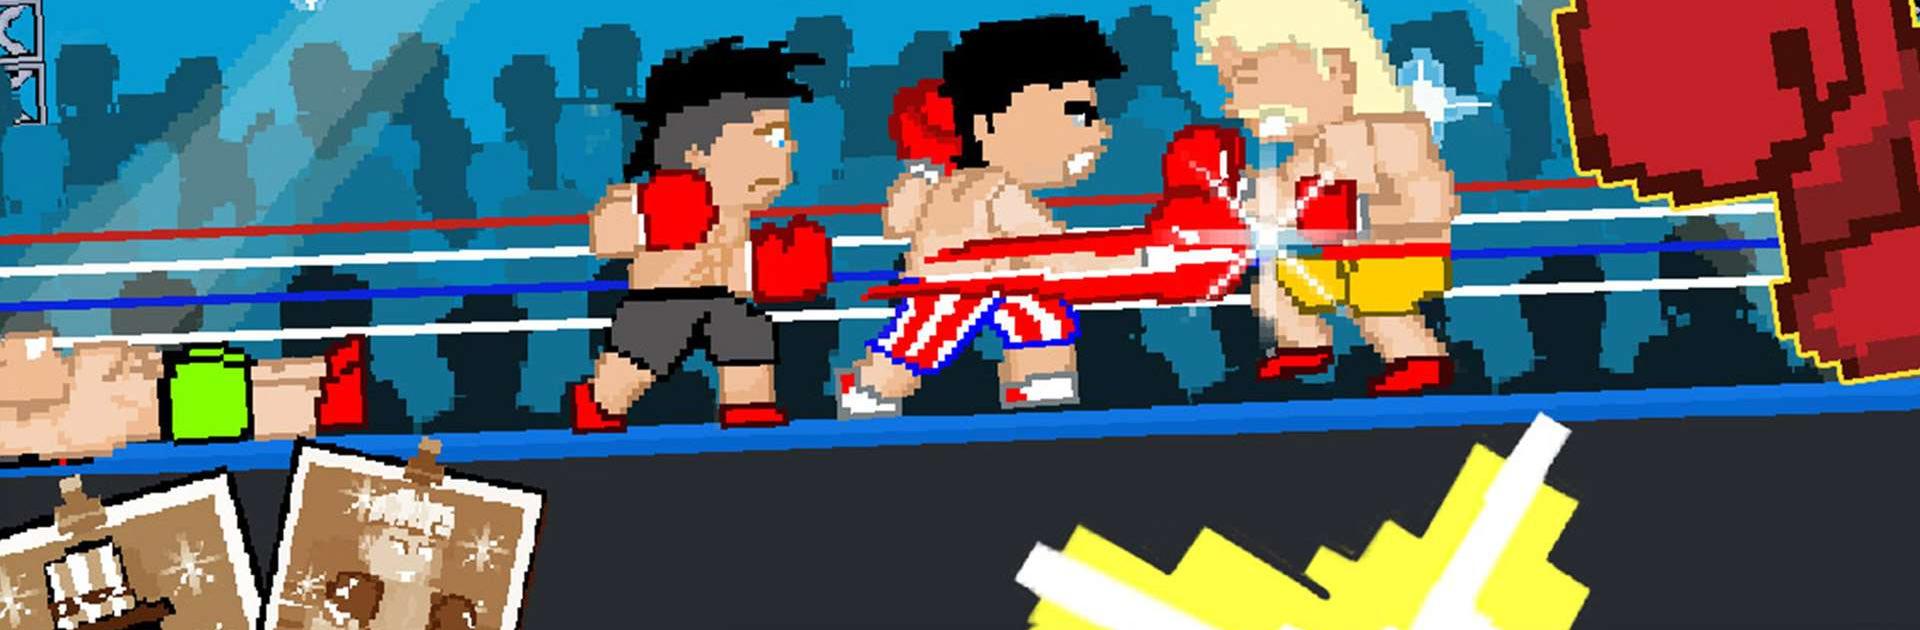 Play Boxing fighter : Super punch Online